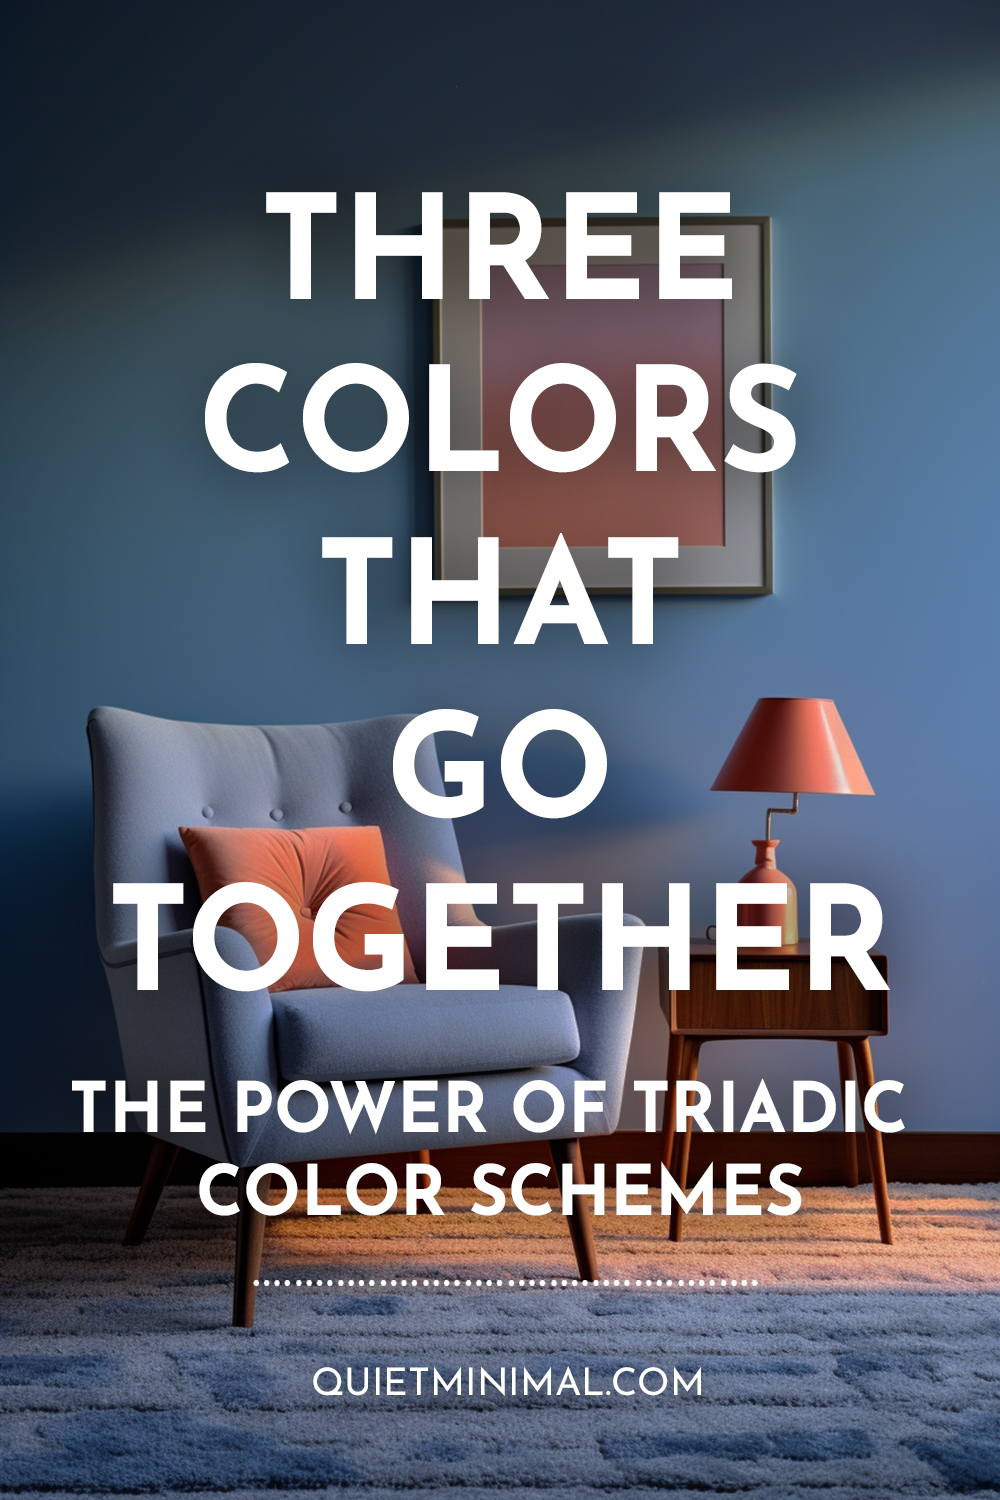 Three colors that harmonize together, showcasing the power of triadic color schemes.